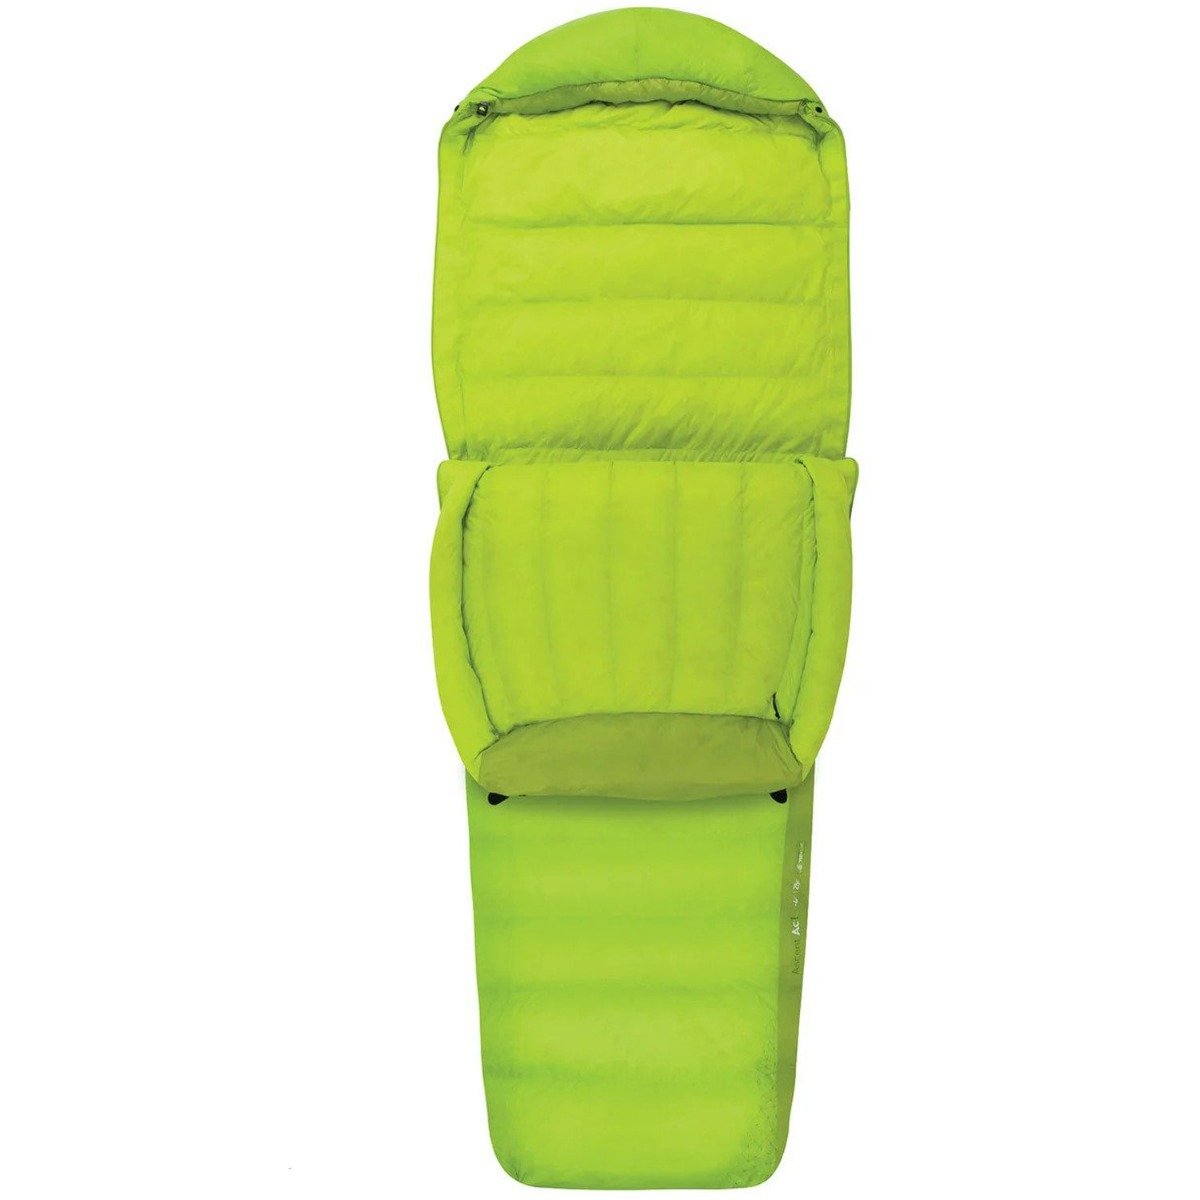 Sea to Summit Ascent 25 Degree Down Sleeping Bag